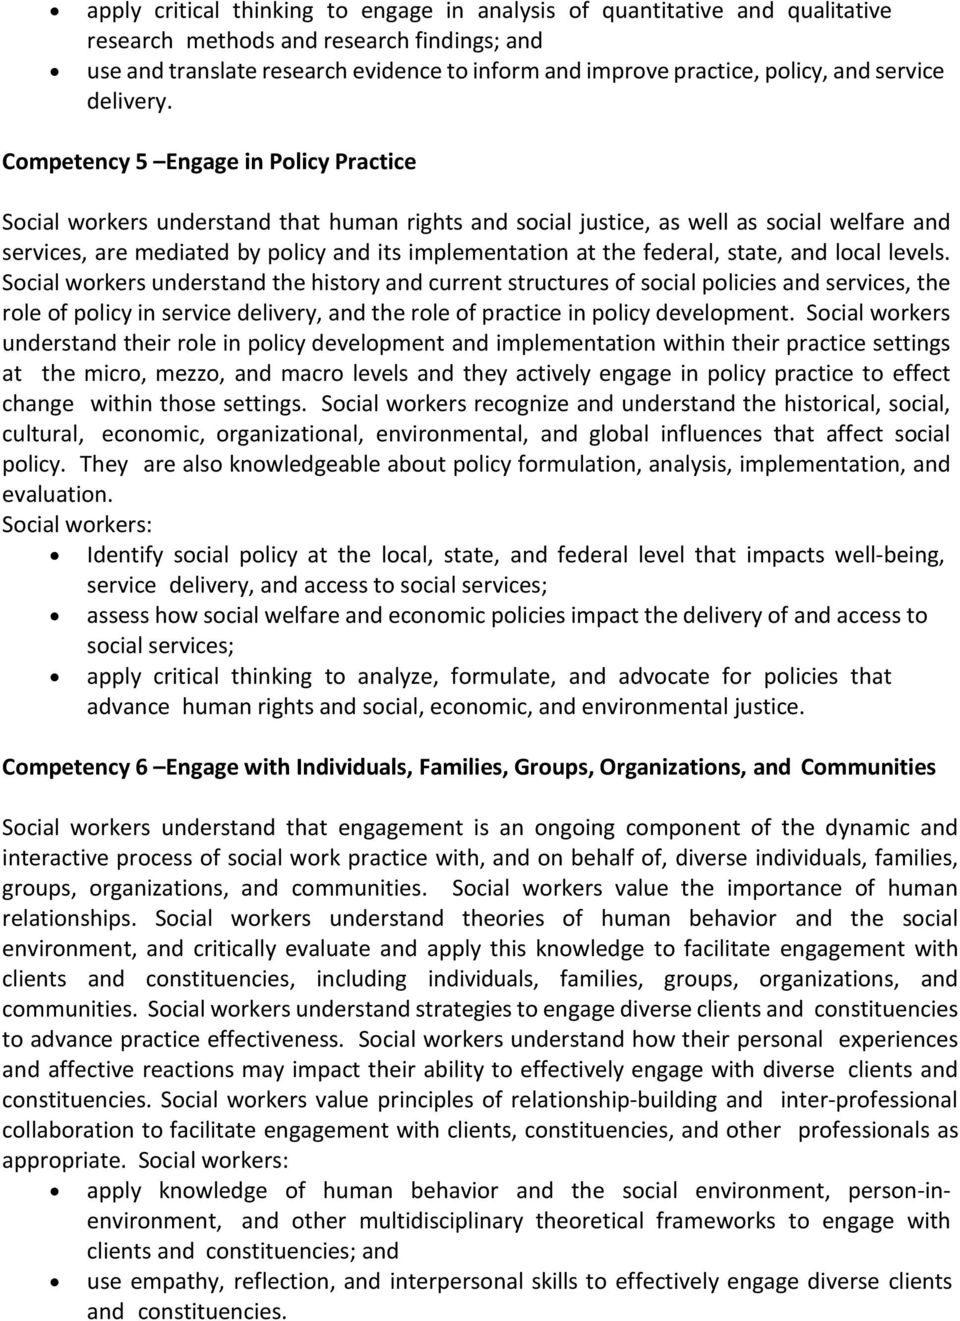 Competency 5 Engage in Policy Practice Social workers understand that human rights and social justice, as well as social welfare and services, are mediated by policy and its implementation at the